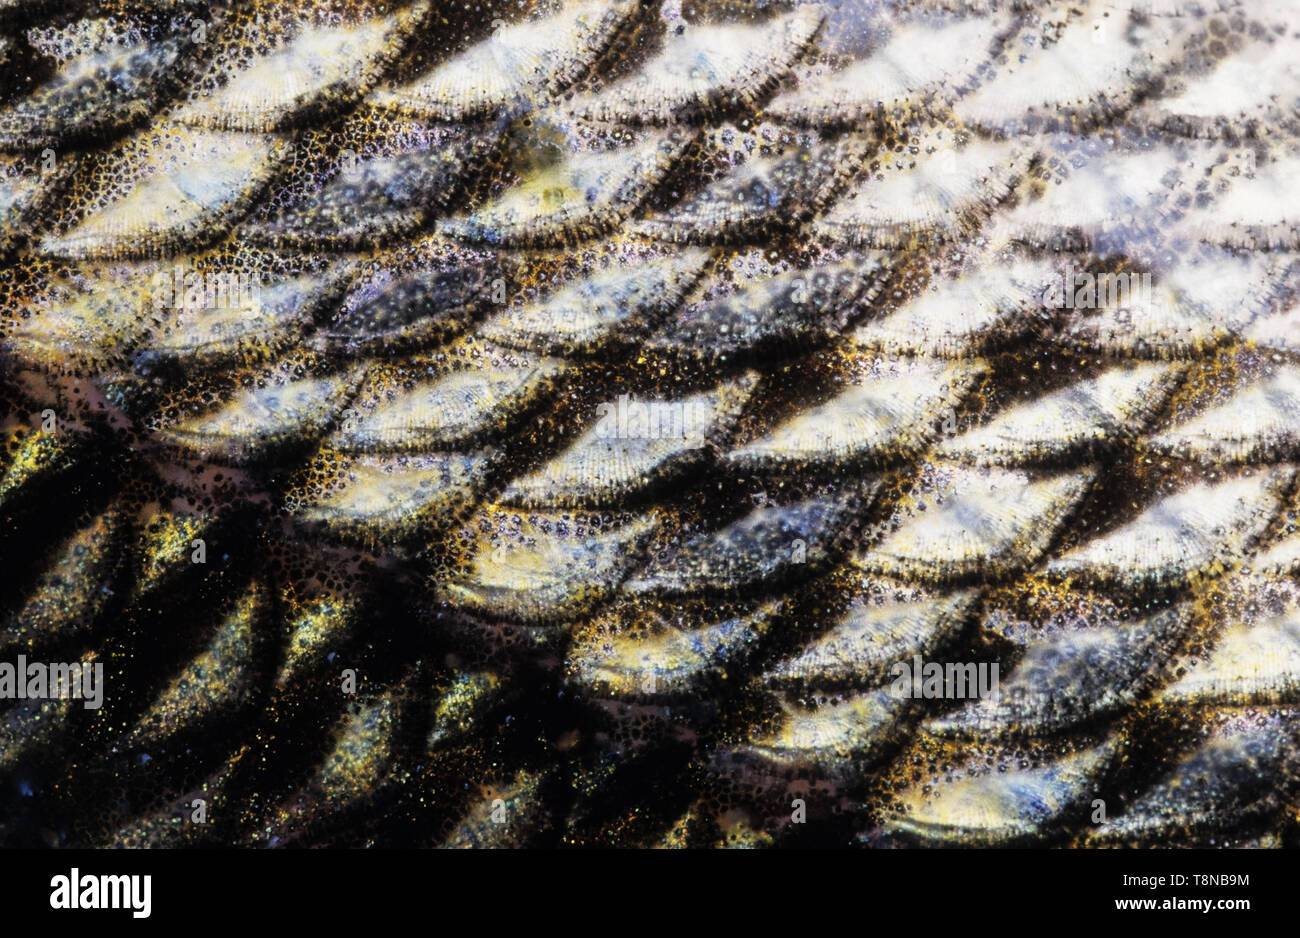 Fish (Zander/Pike-perch, Sander lucioperca) scale close-up. Image looks a bit soft due to the epidermal mucus covering the scales. Stock Photo